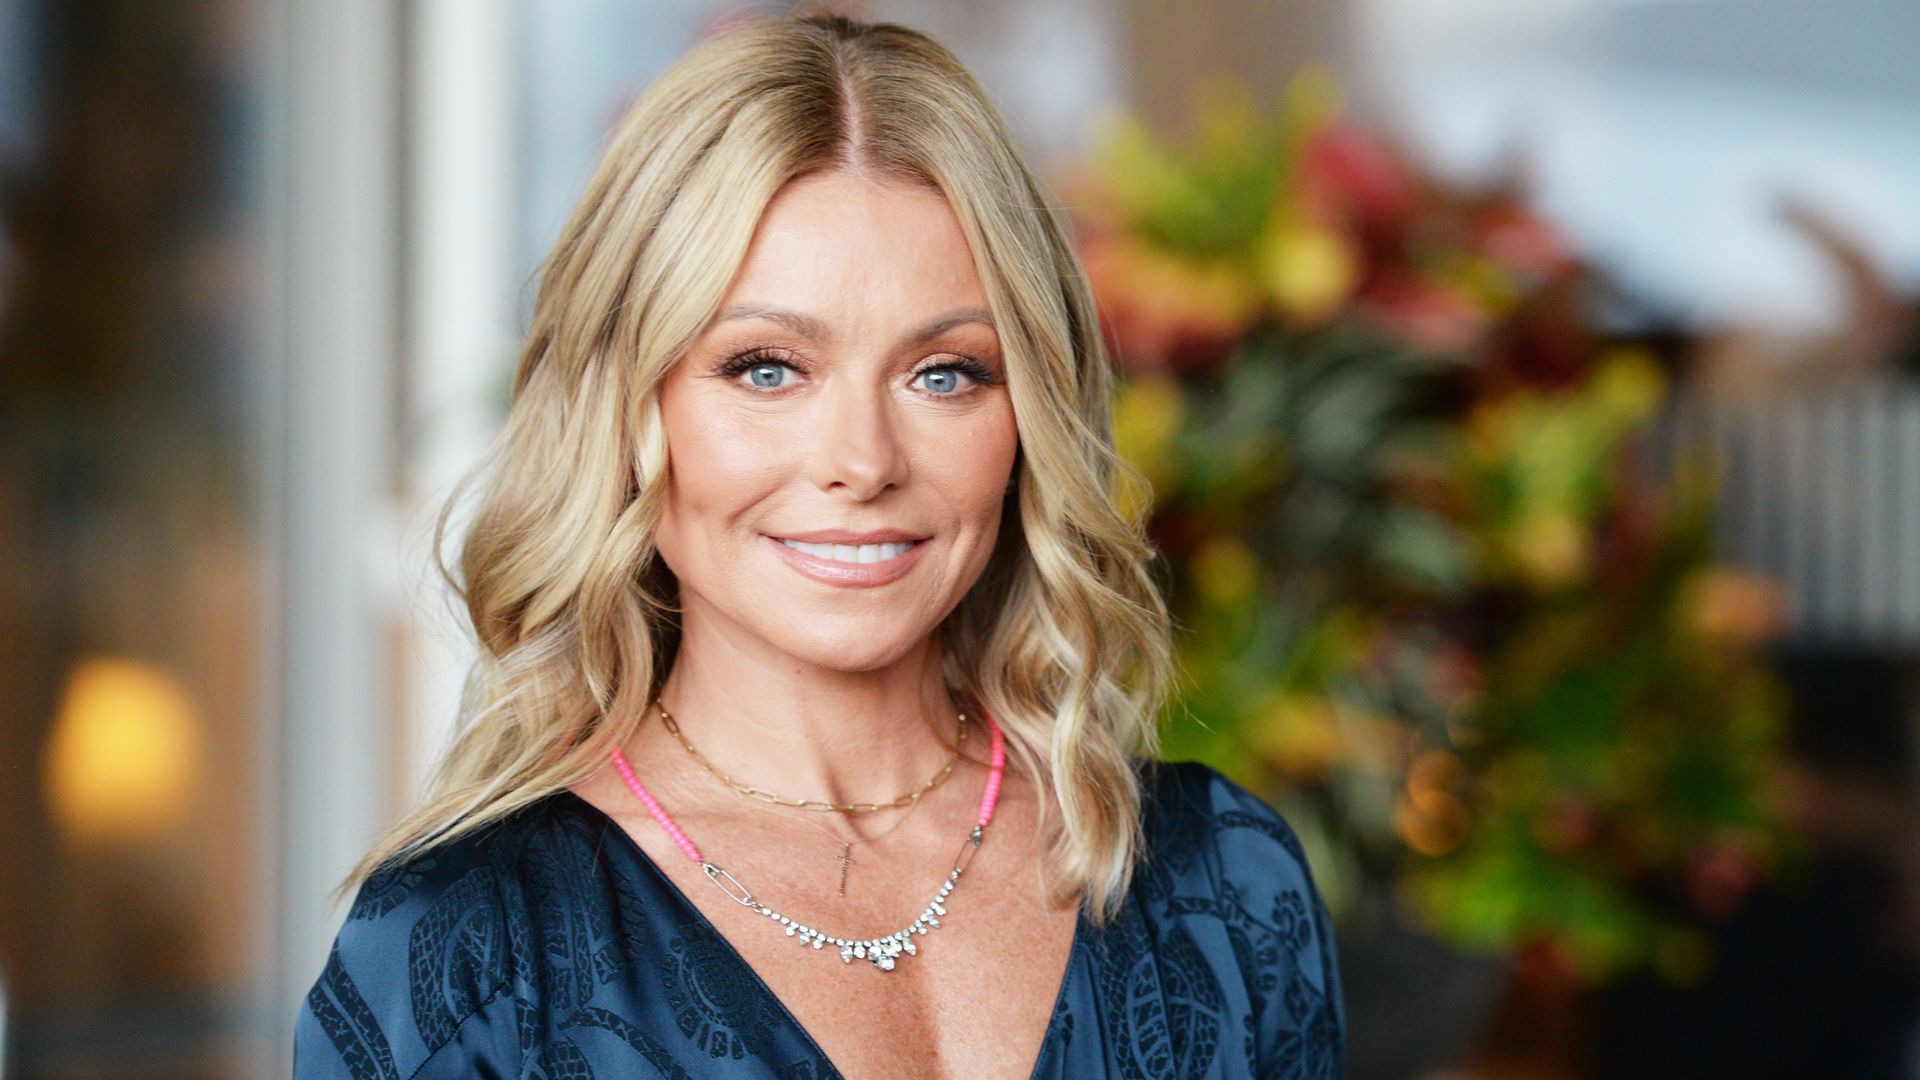 Kelly Ripa shares exciting career announcement after teasing retirement plans